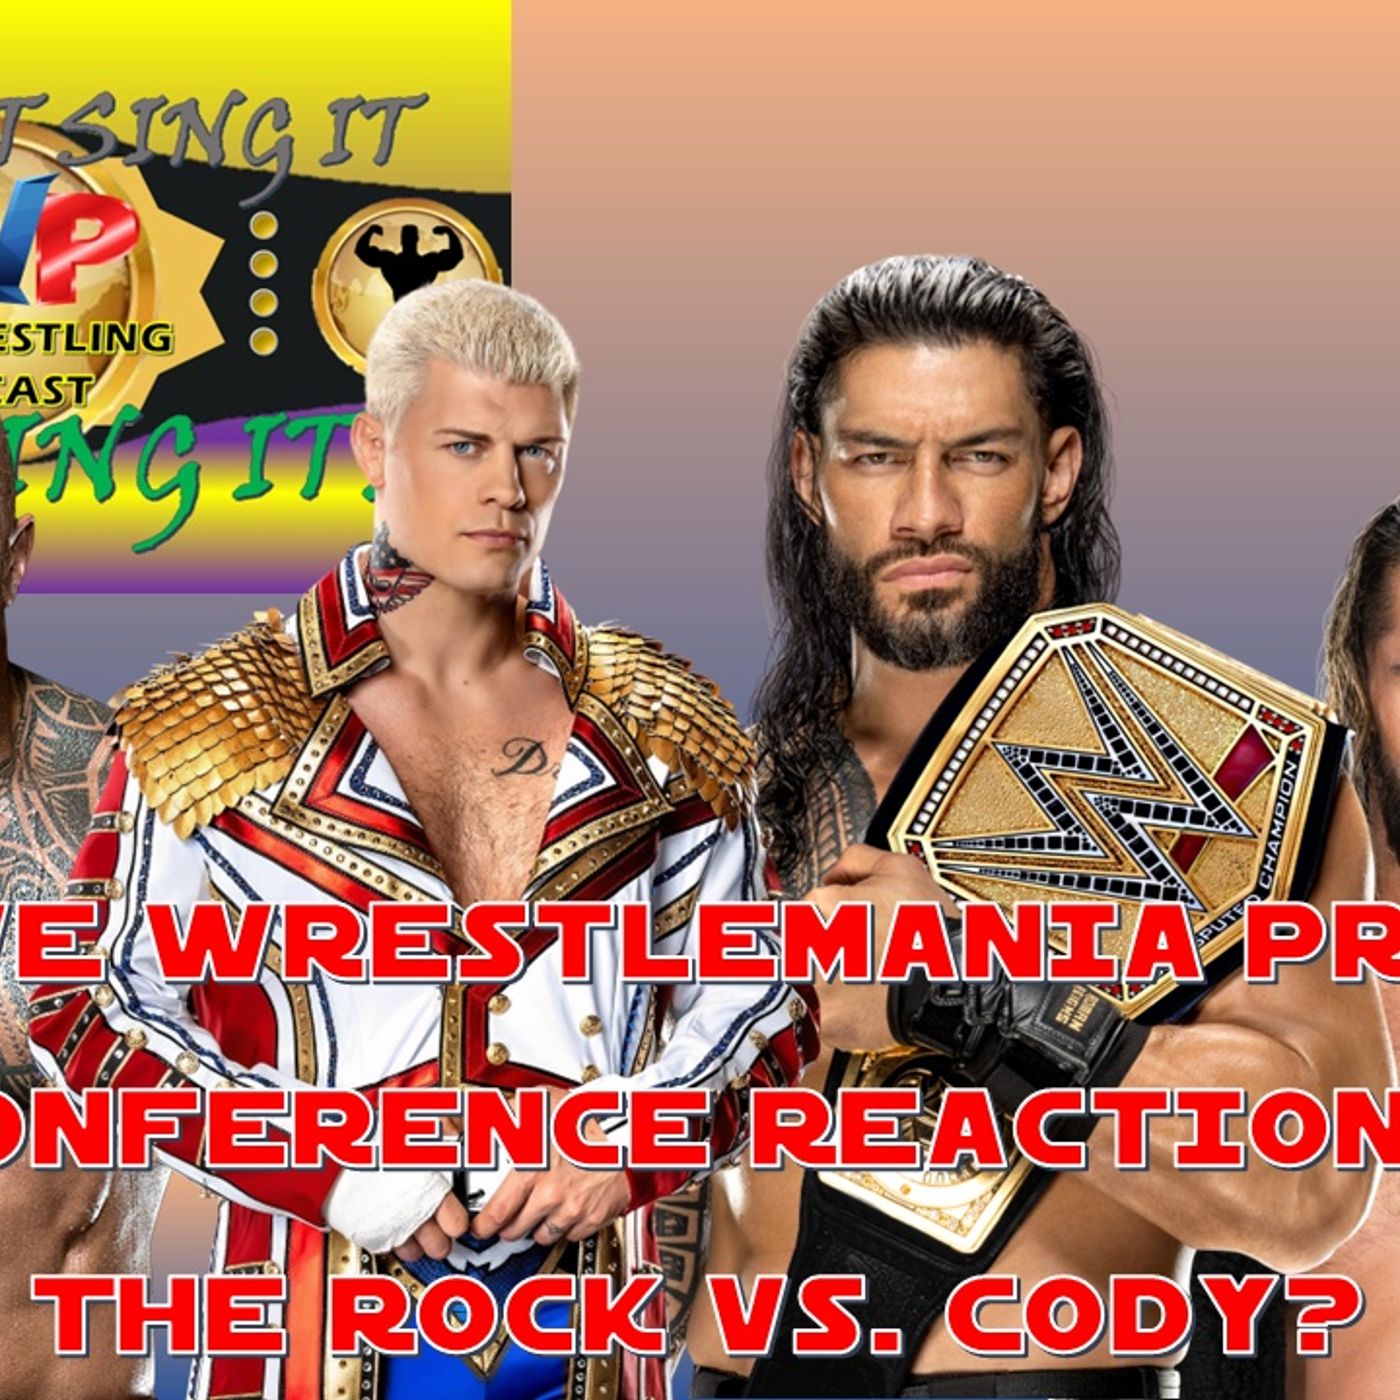 WWE Press Conference Reactions - Rock vs Cody?